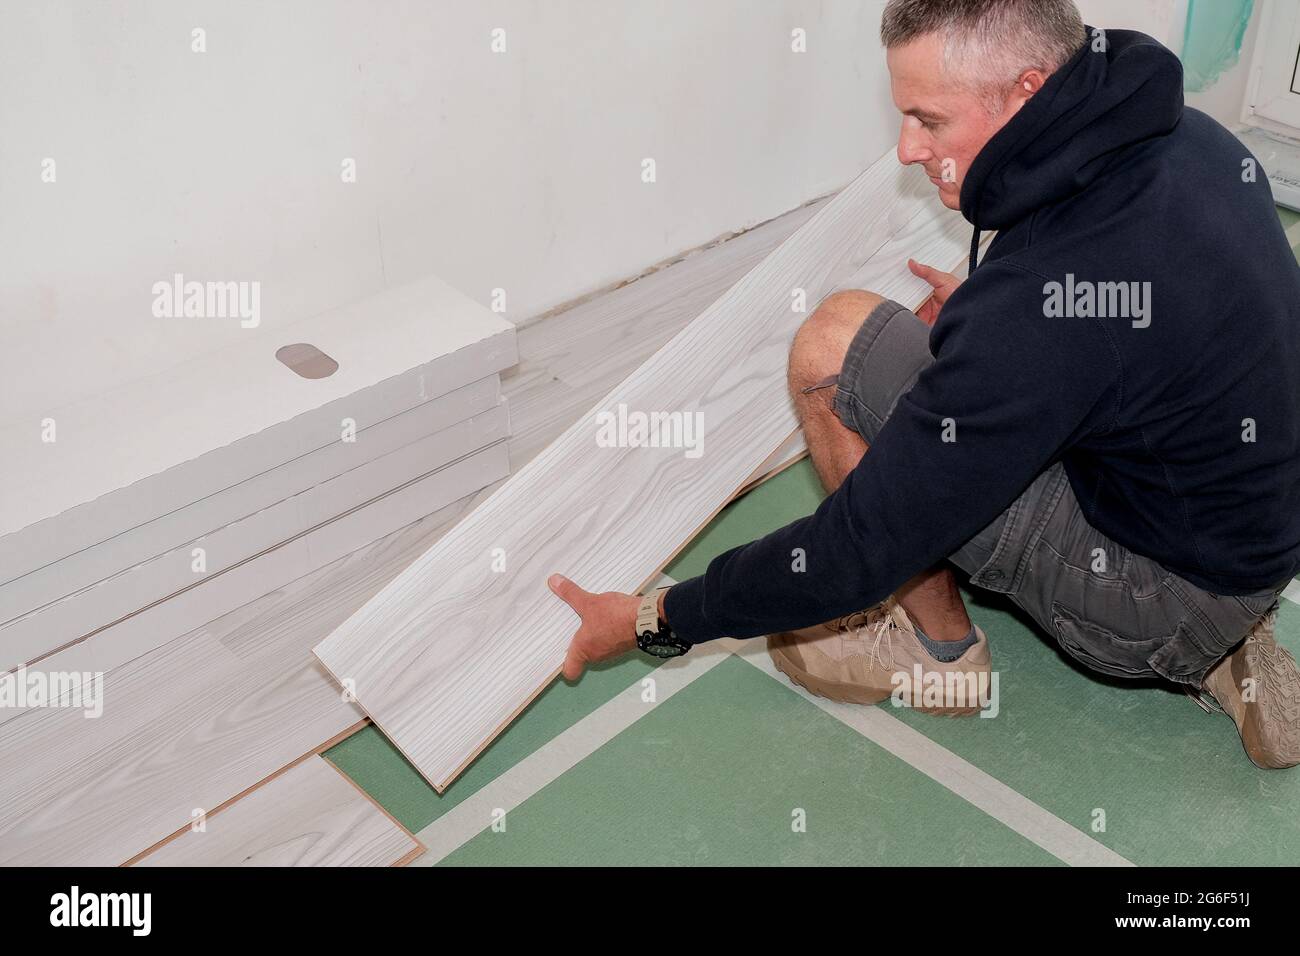 A worker who connects the laminate flooring during the renovation of the house. Stock Photo